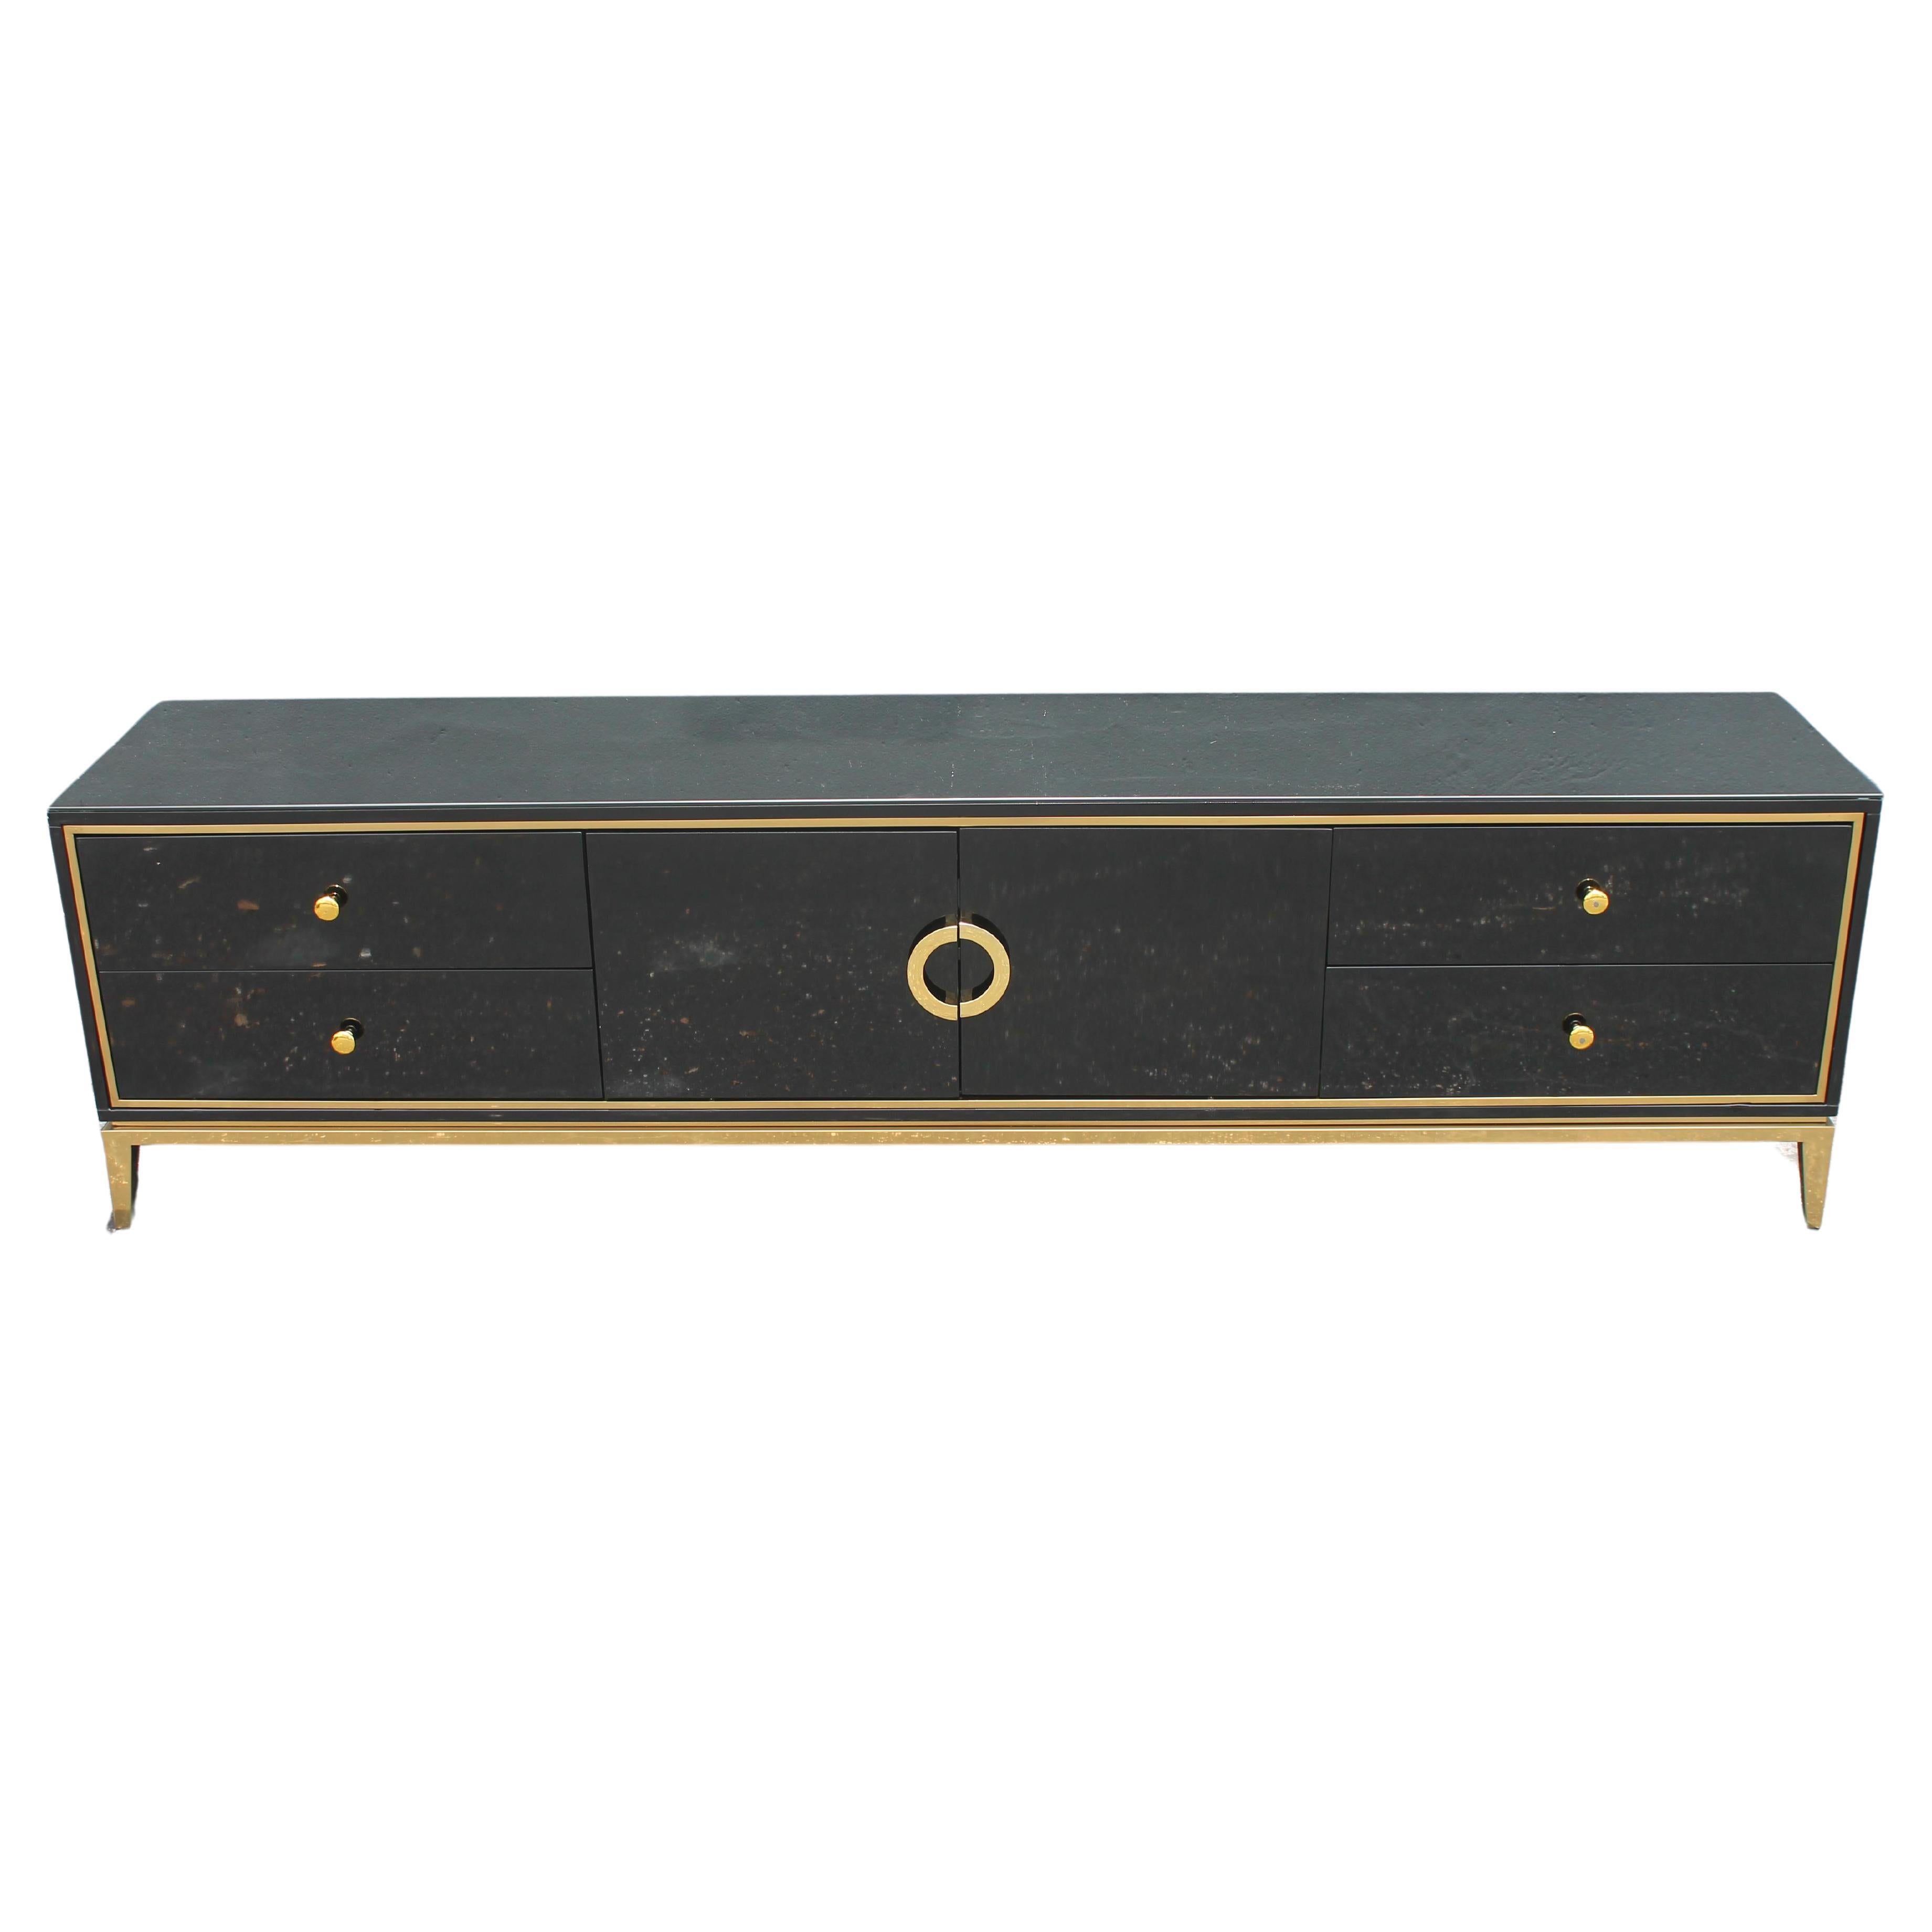 1960's MCM Black Lacquer Low Buffet/ Console/ Credenza style Pierre Cardin